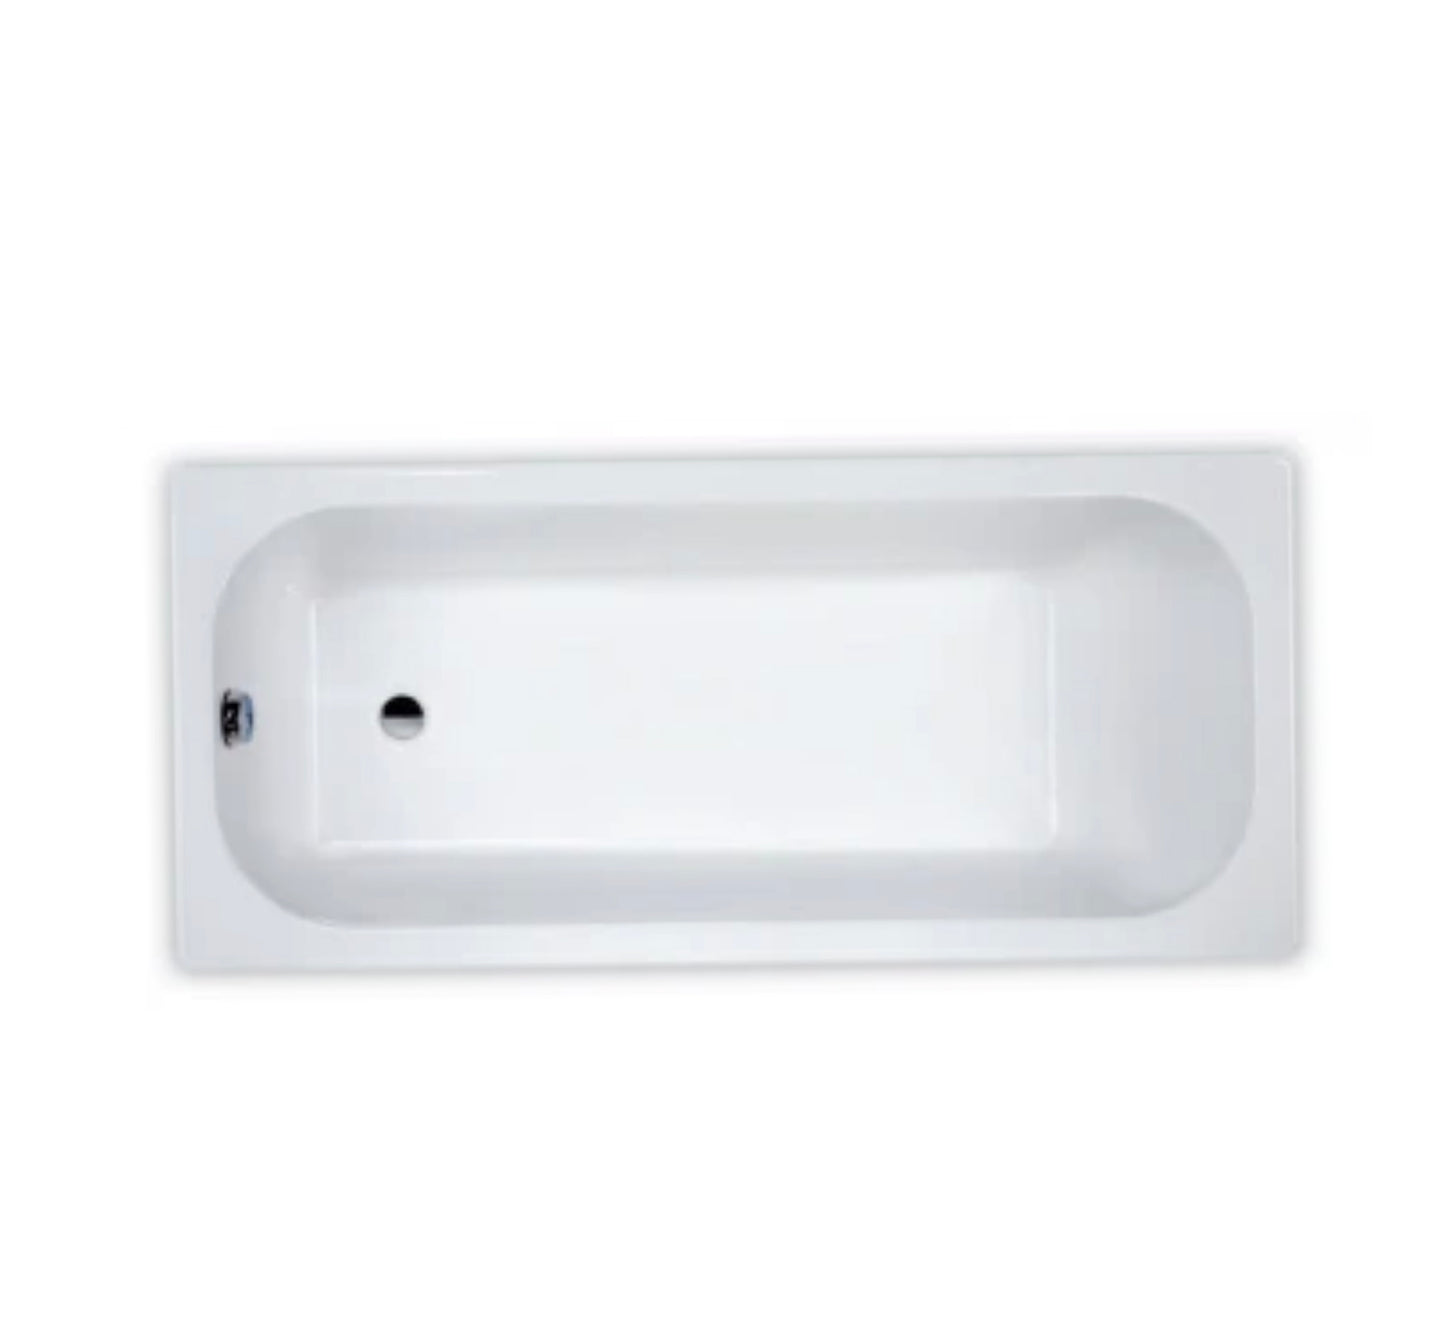 HOESCH PURE ALPHA RECTANGULAR BATHTUB WITH SIDE WASTE HOLE 1700X750X450 MM WHITE ACRYLIC - 5503.010, VIEGA SIMPLEX 6168.2 AUTOMATIC BATH WASTE & OVERFLOW WITHOUT ODOUR TRAP 1 1/2 - PLASTIC PP - 133825